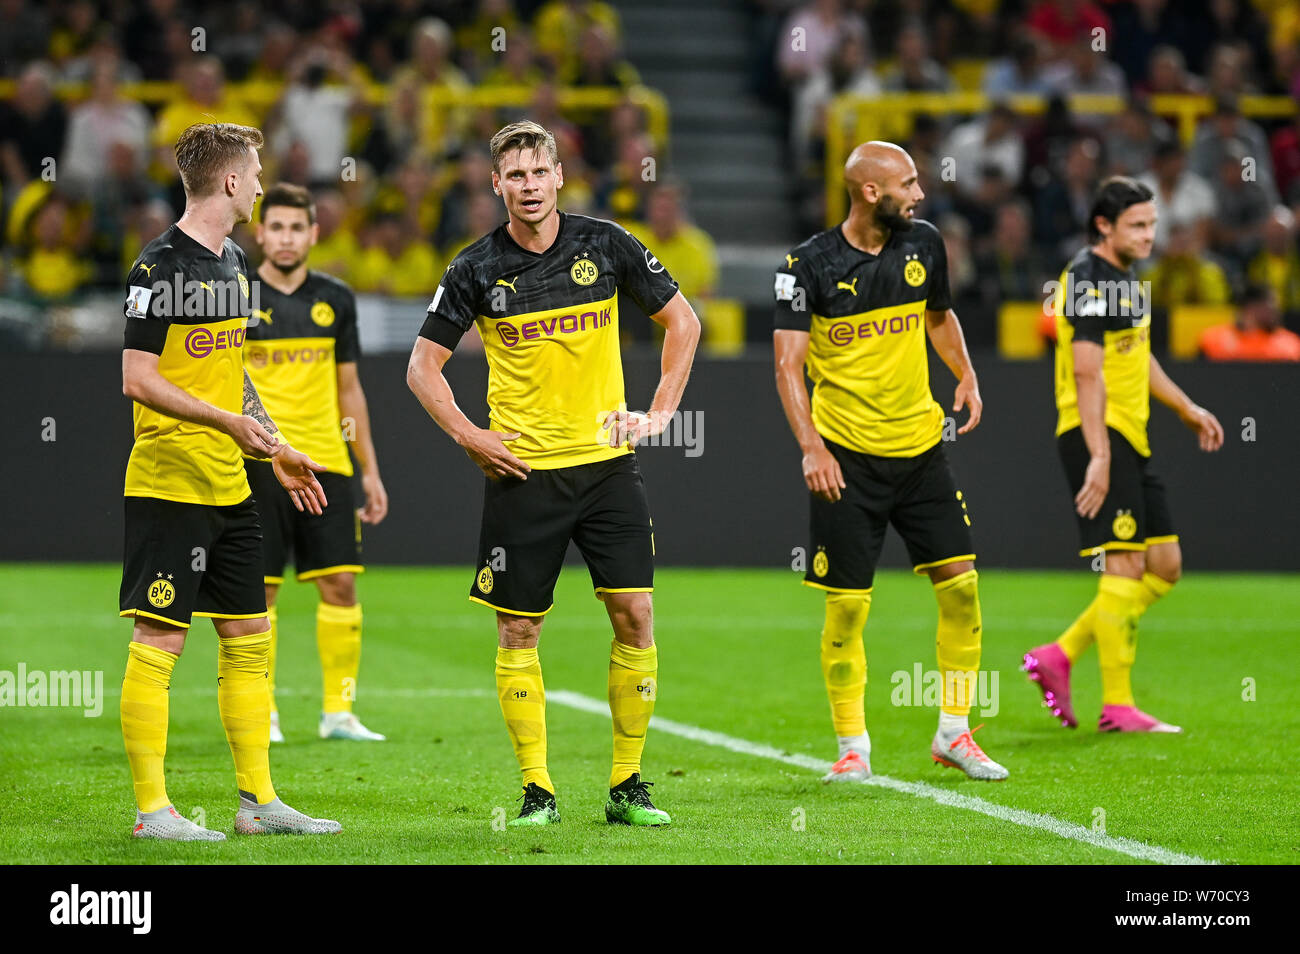 Marco Reus from Borussia Dortmund (L) and Lukasz Piszczek from Borussia Dortmund (R) are seen in action during the Germany Supercup Final 2019 match between Borussia Dortmund and Bayern Munich.(Final score: Borussia Dortmund 2:0 Bayern Munich) Stock Photo